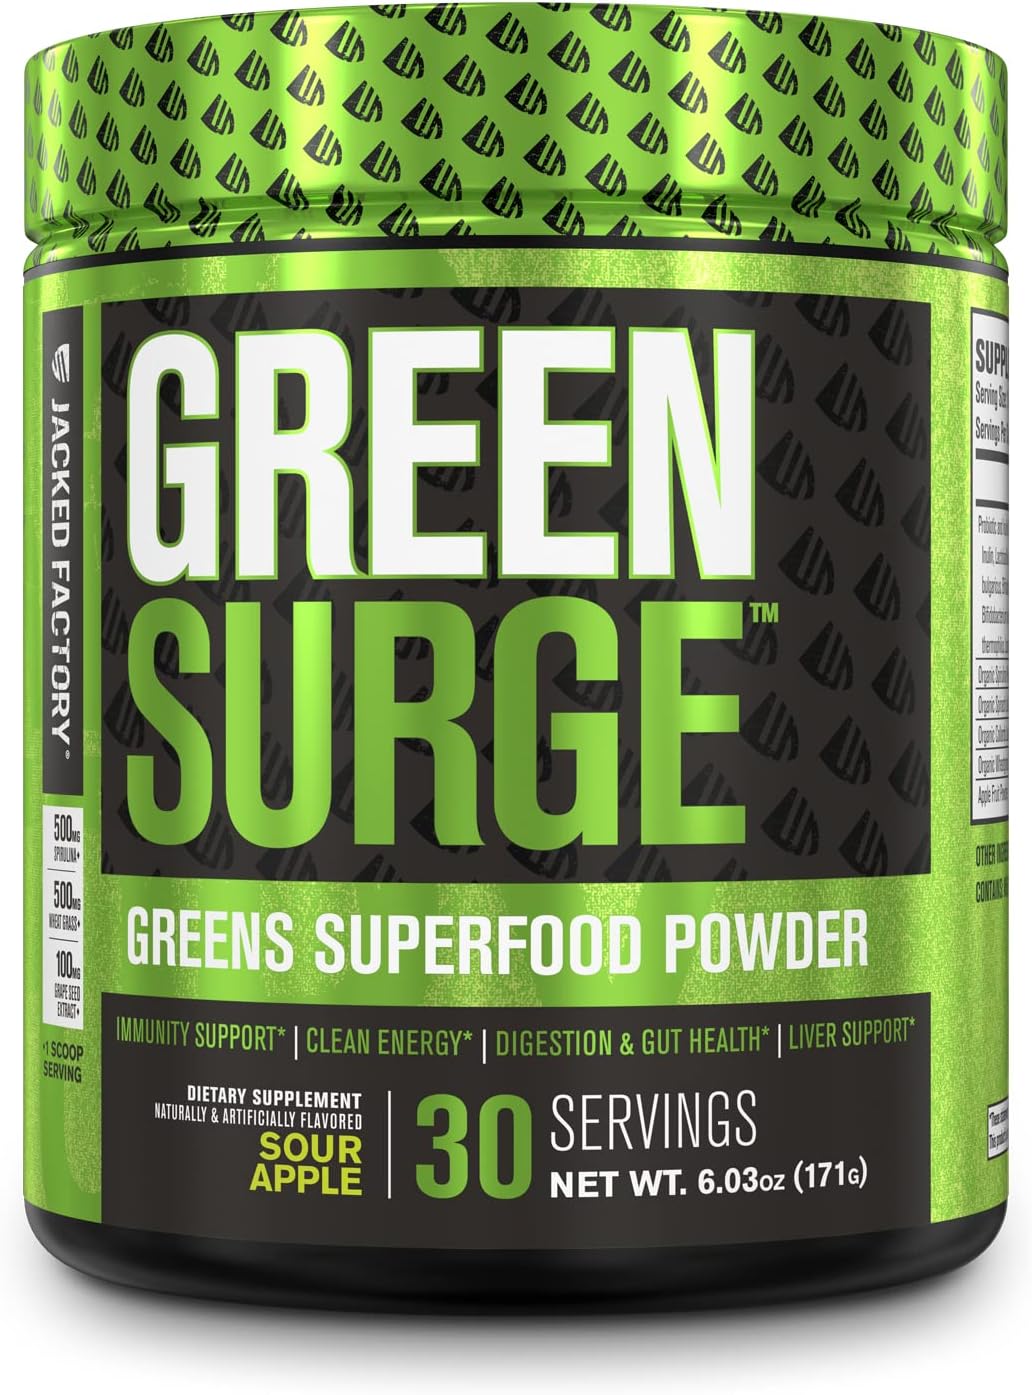 Green Surge Superfood Powder Supplement Review